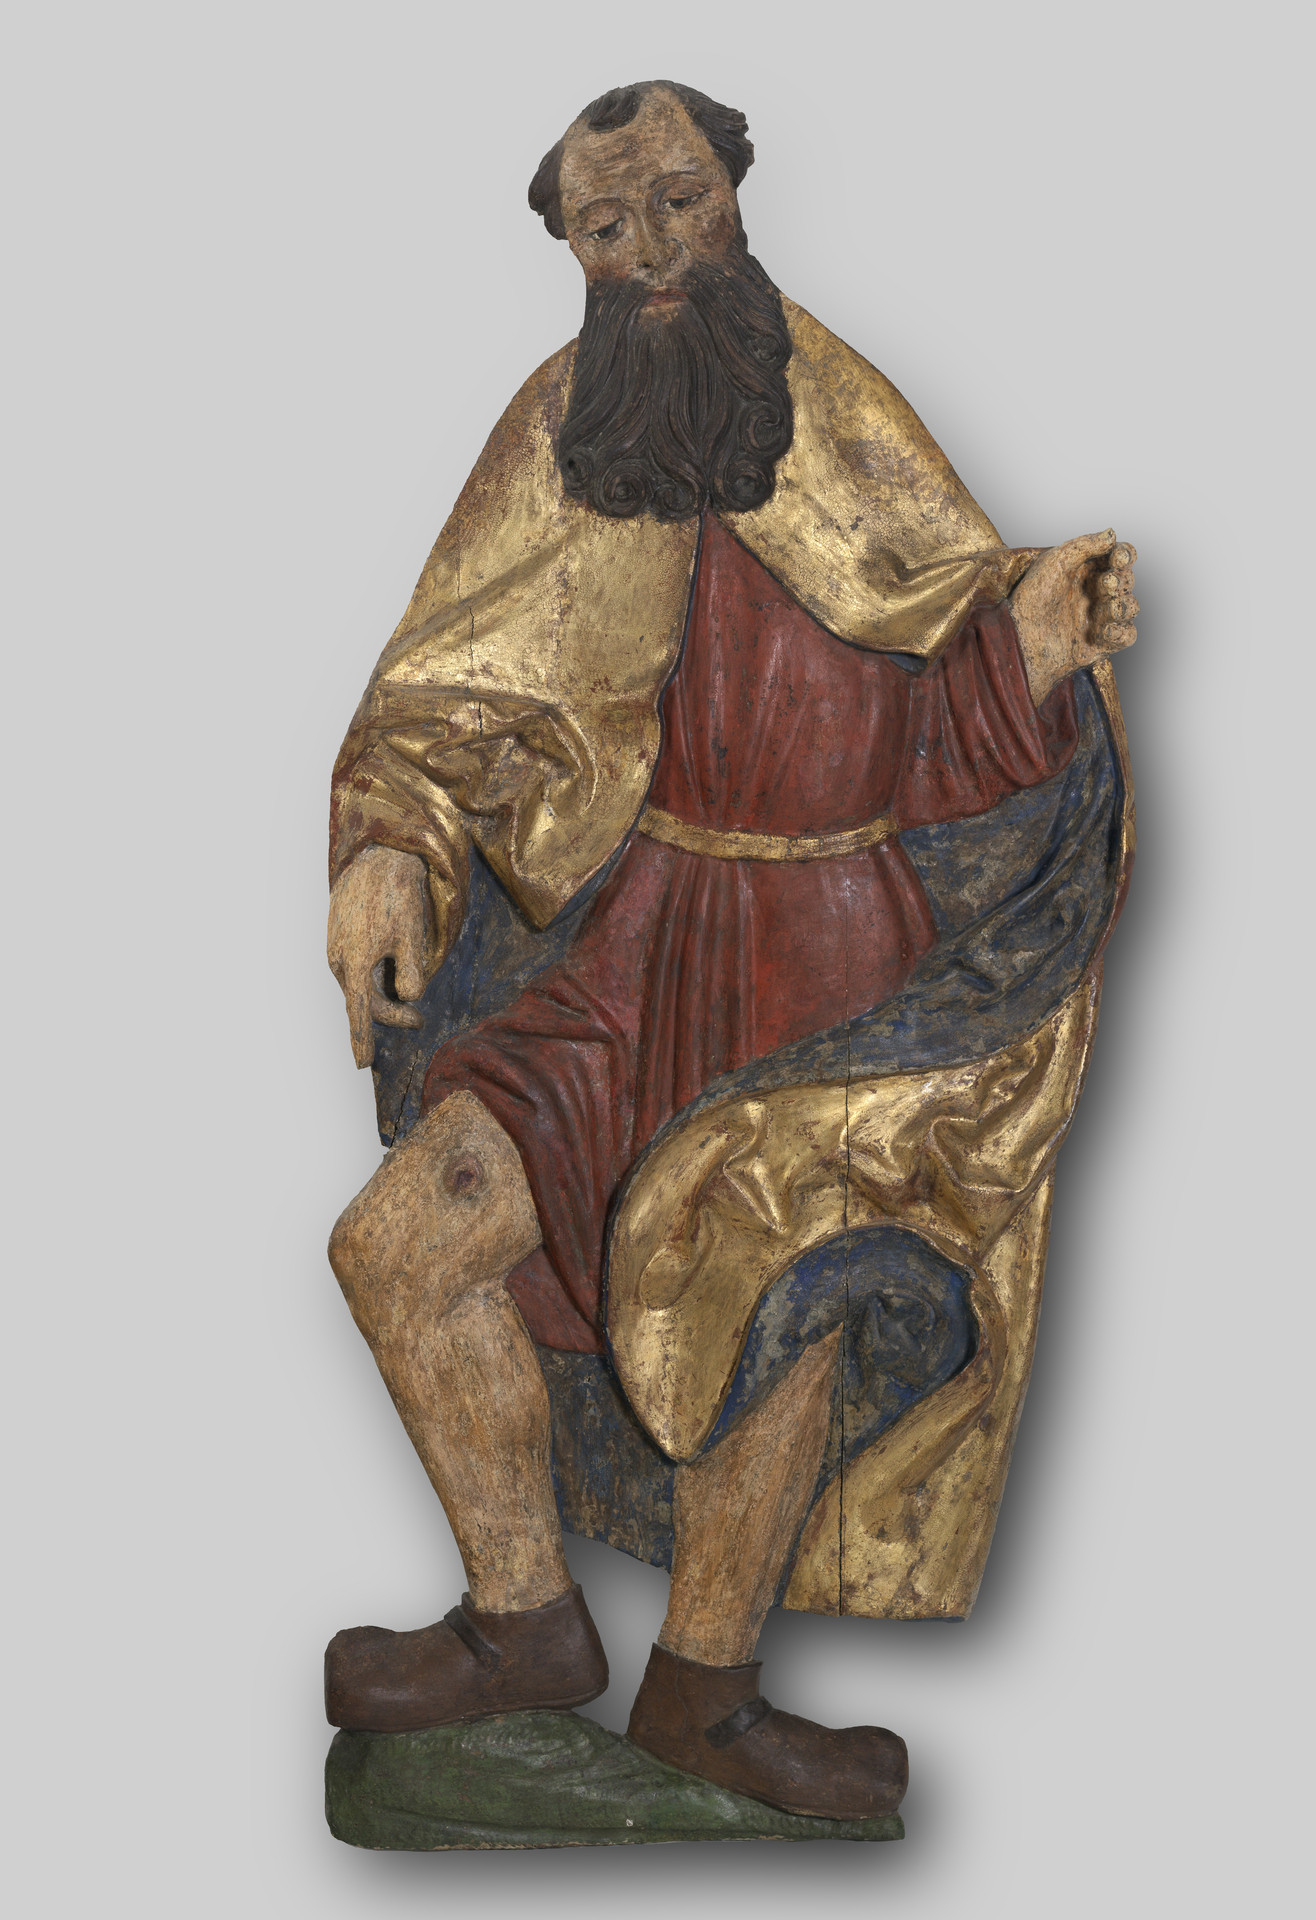 Painted wood sculpture of a frontal facing full figure jolly man in robes